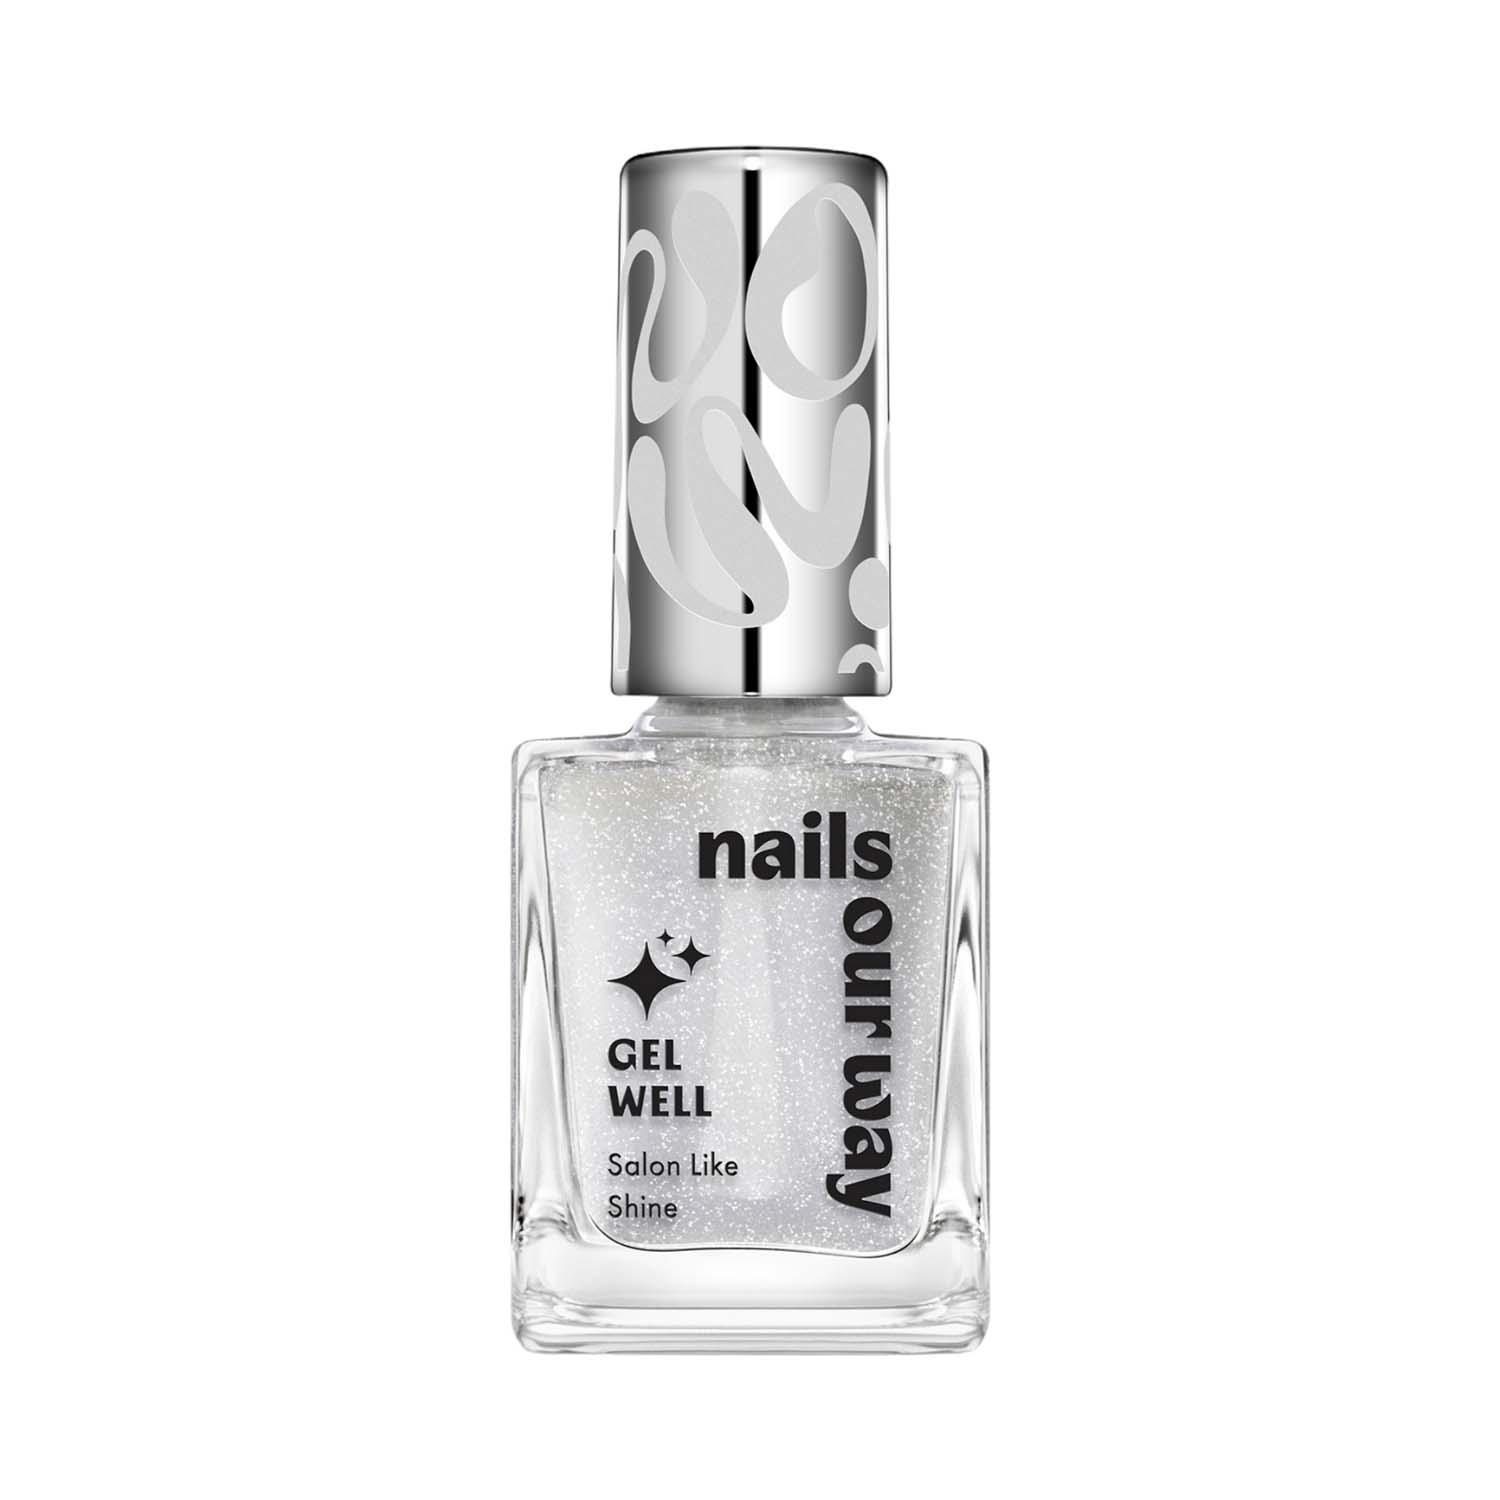 Nails Our Way | Nails Our Way Gel Well Nail Enamel - 708 Gorgeous (10 ml)